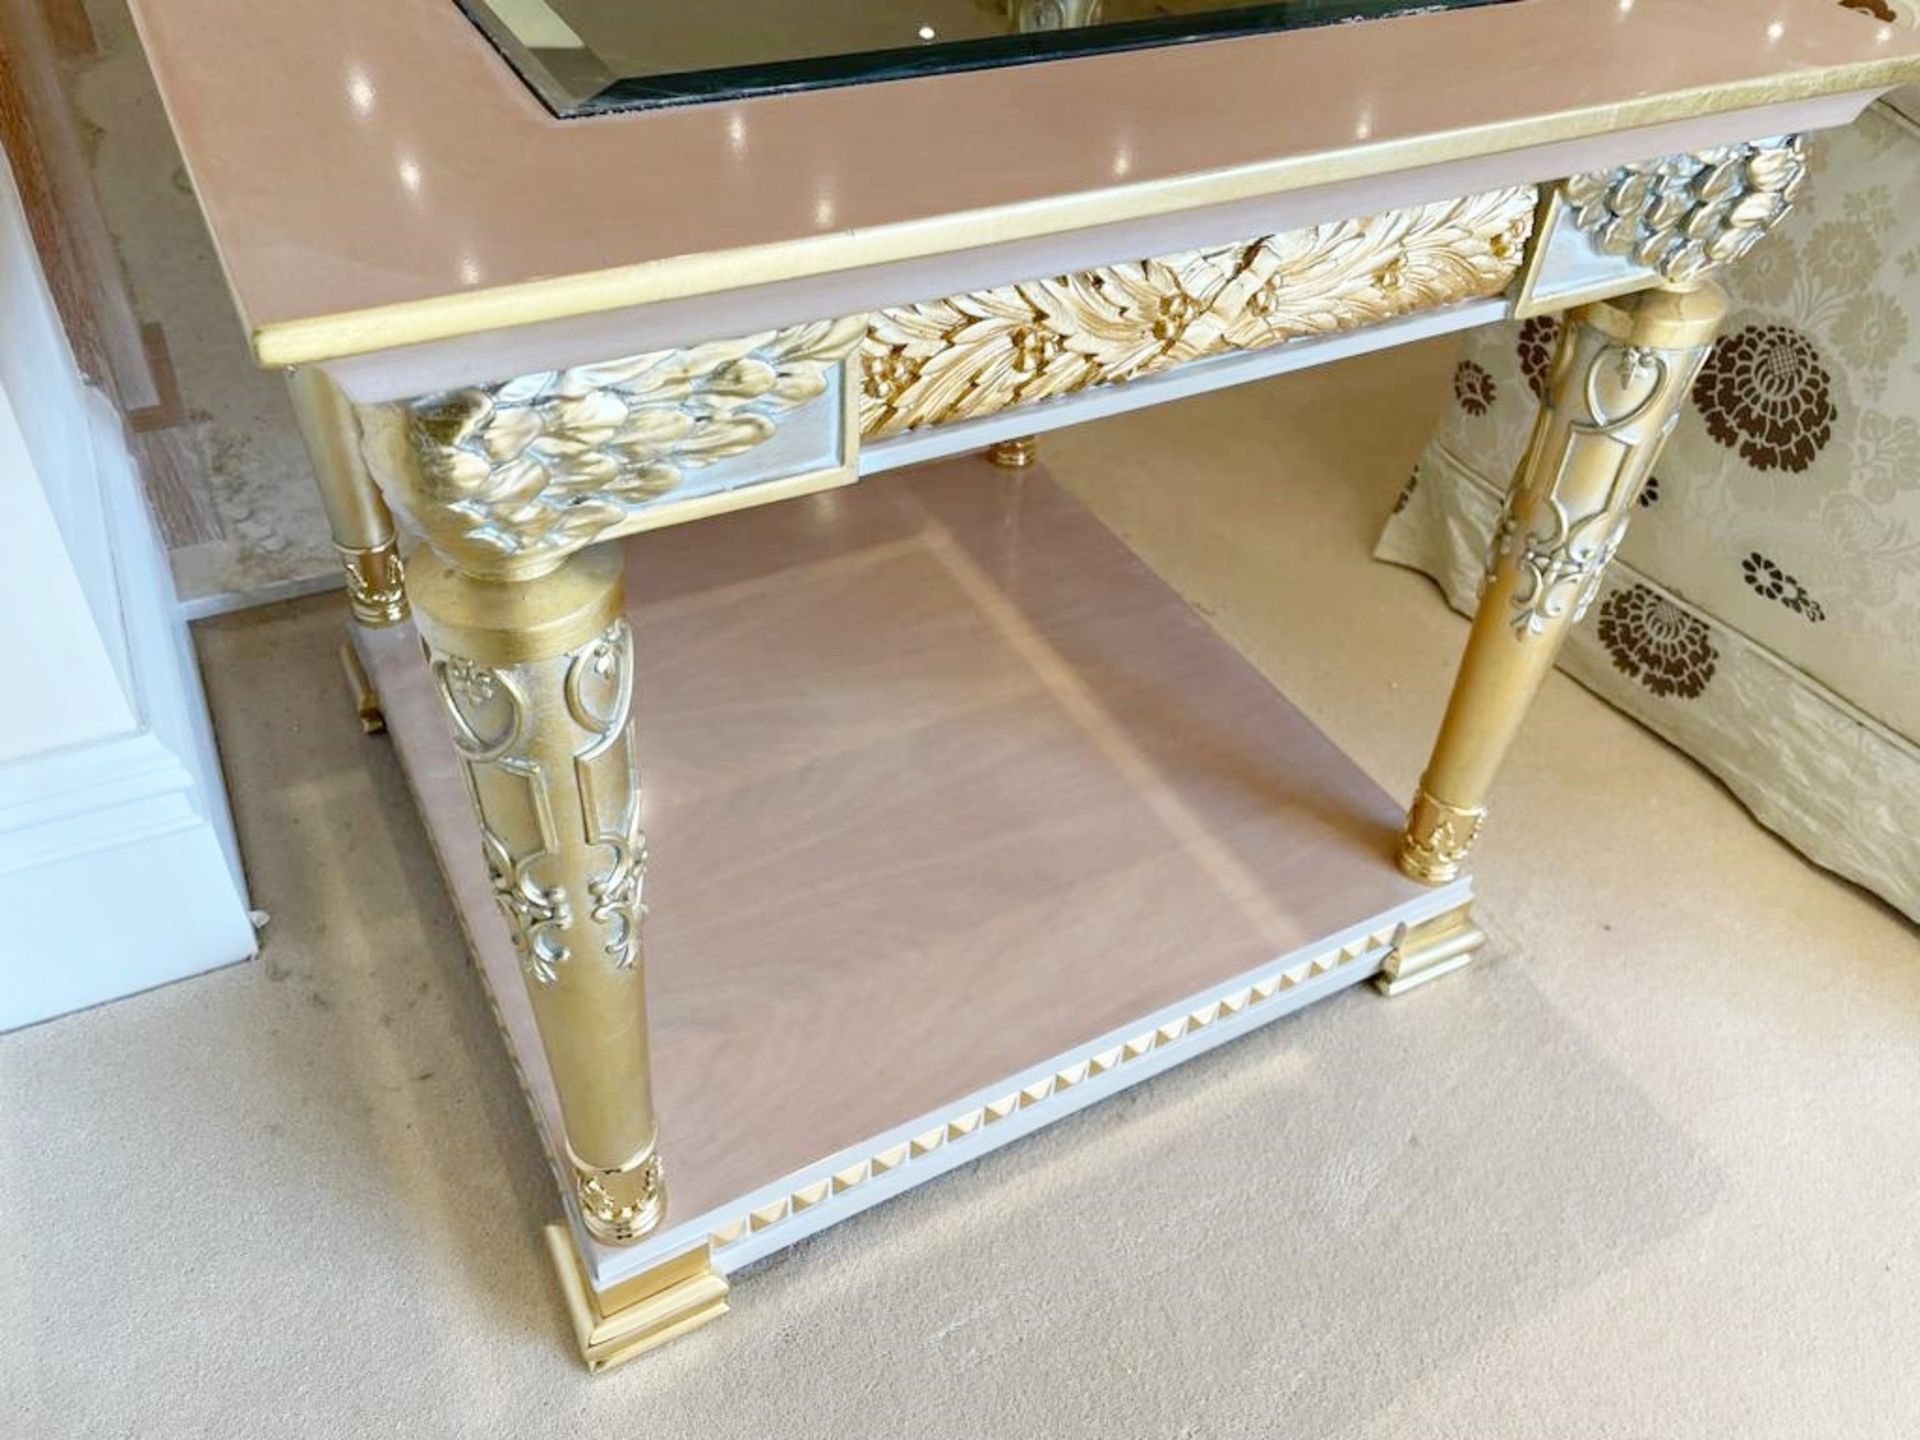 2 x Hand Carved Ornate Side Tables Complimented With Birchwood Veneer, Golden Pillar Legs, Carved - Image 6 of 13